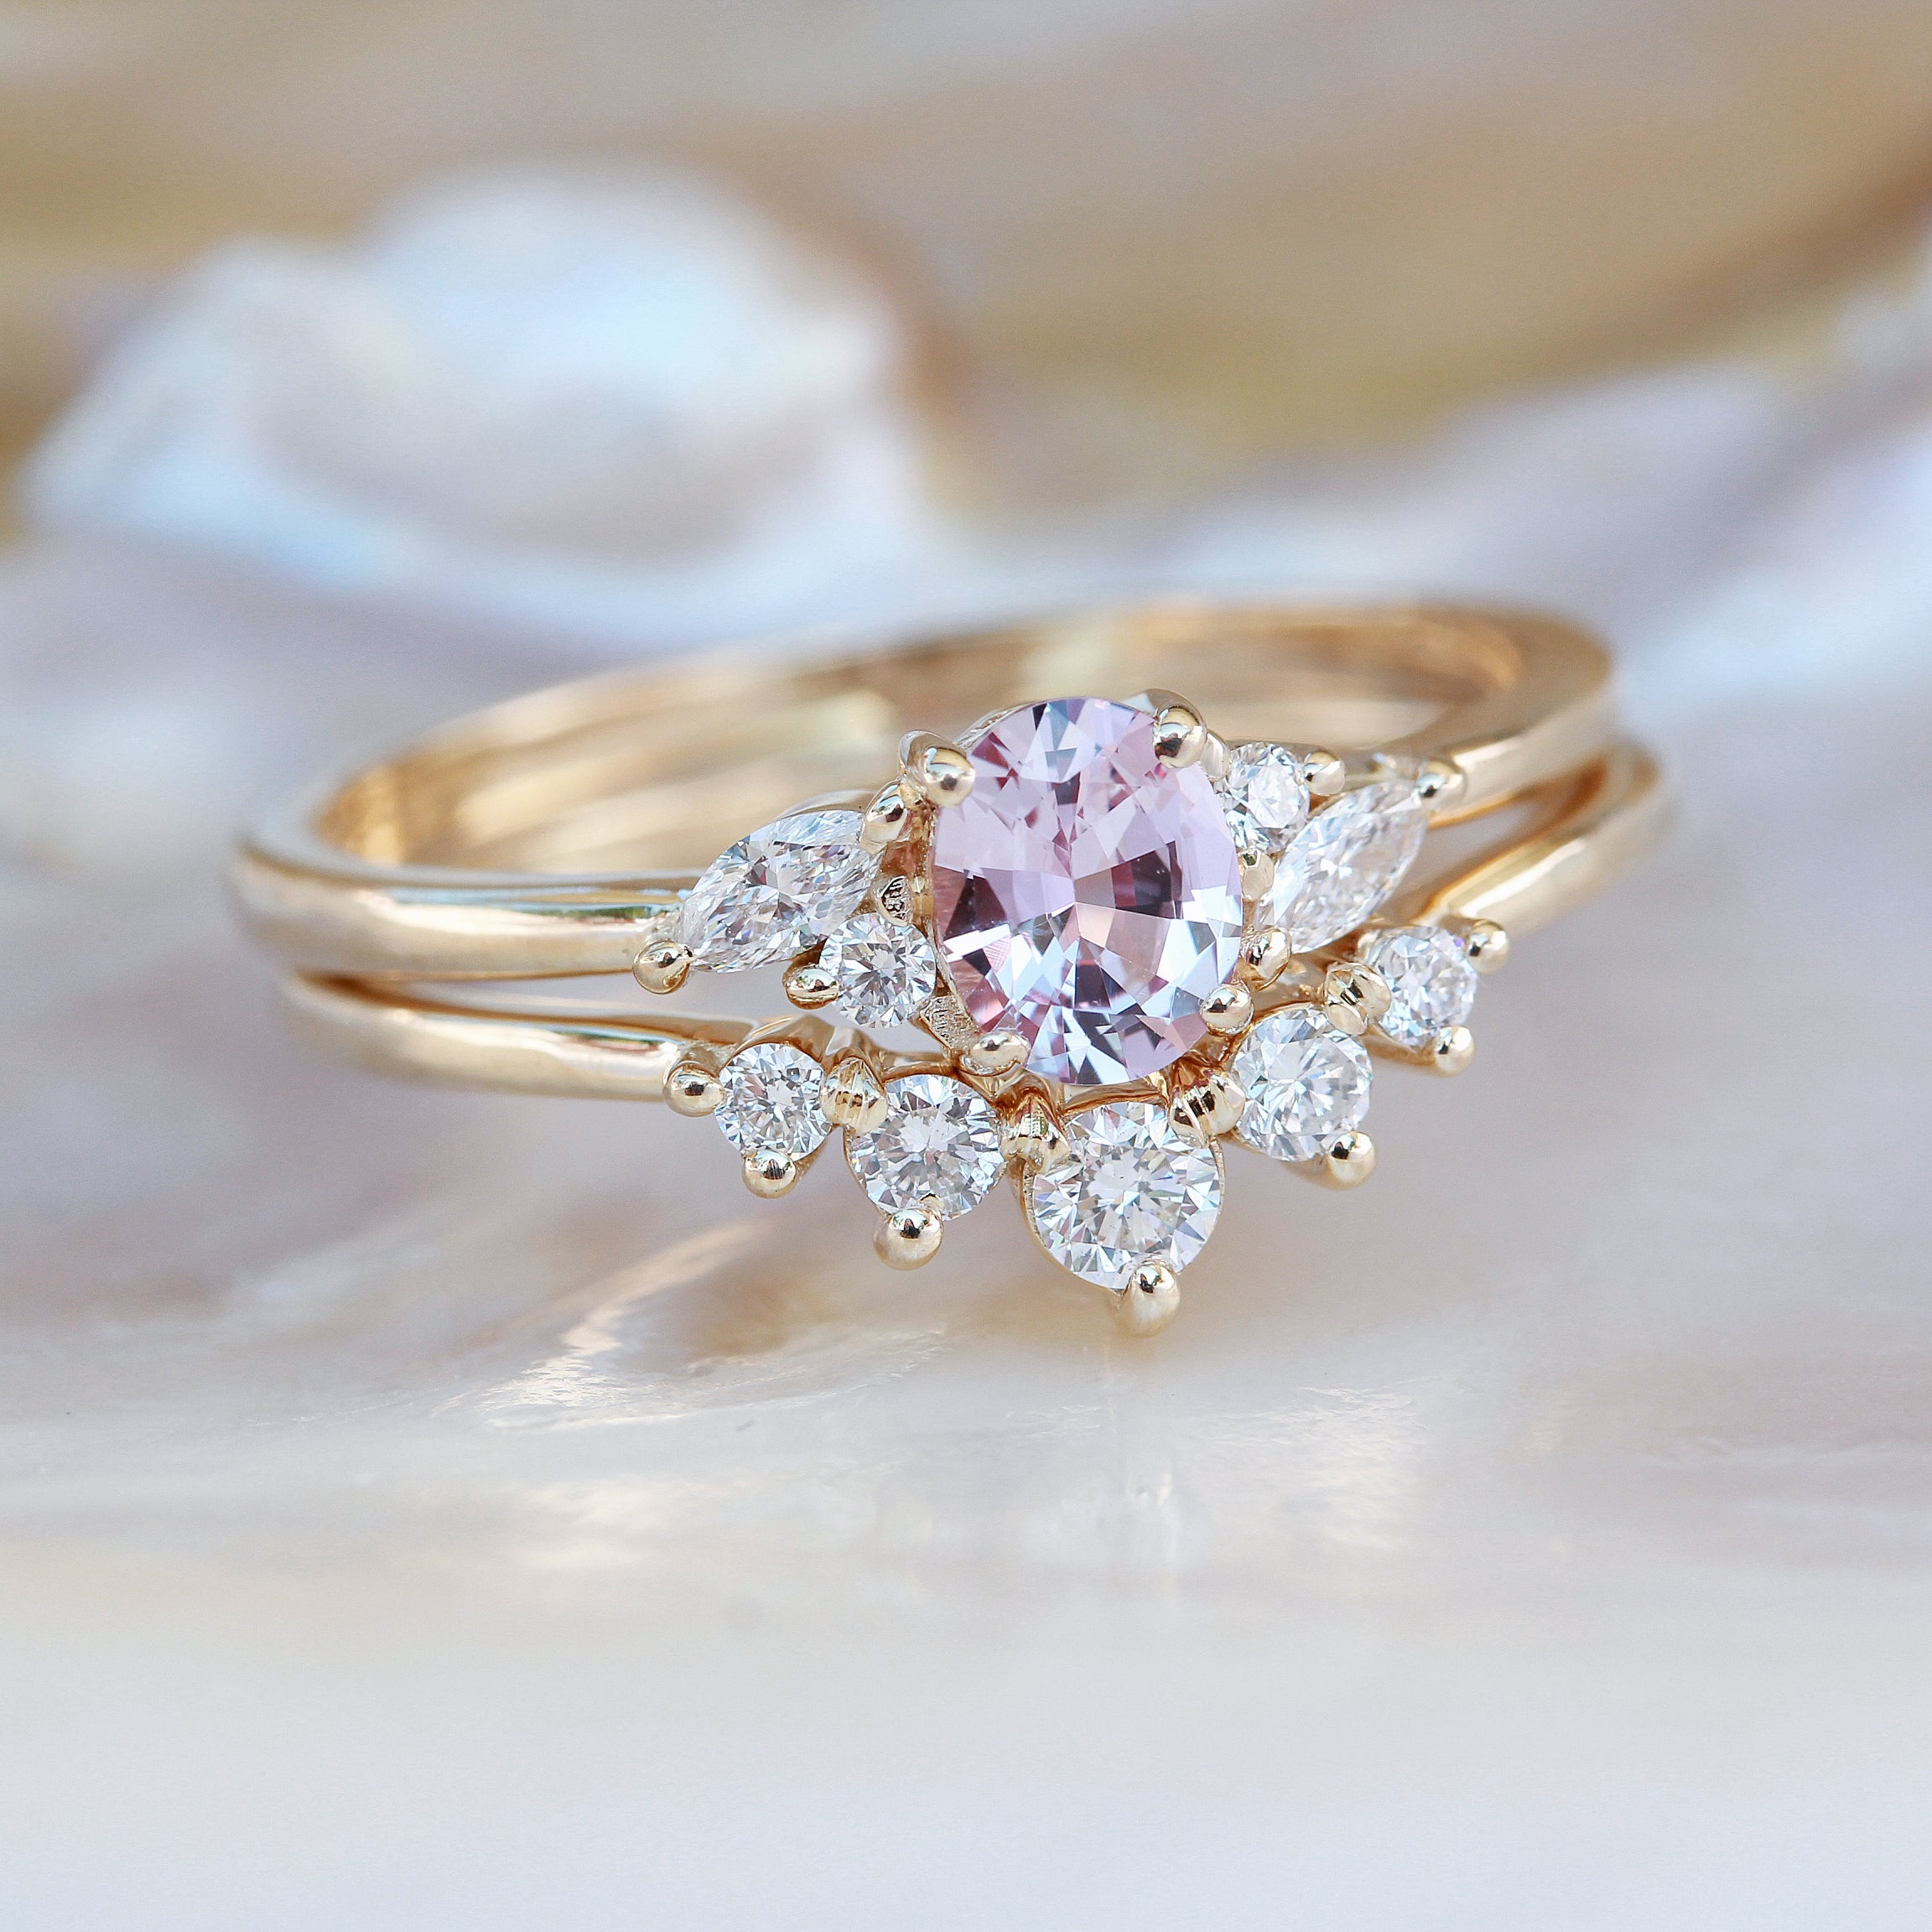 30 Best Dainty Engagement Rings To Get That 